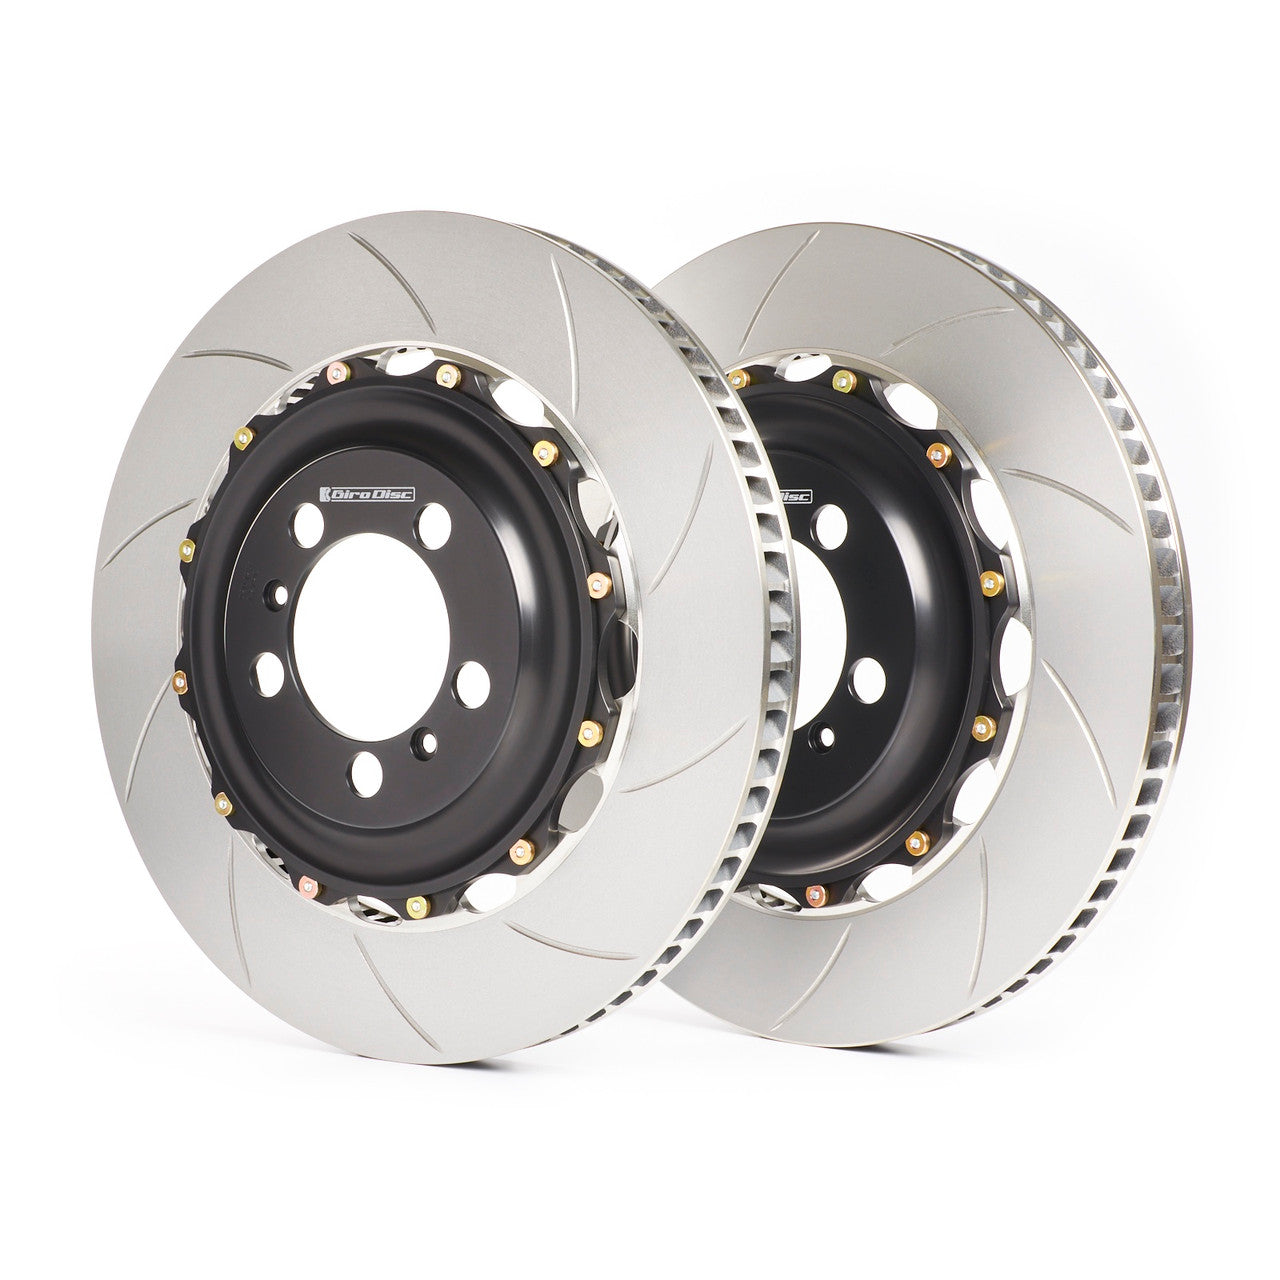 GiroDisc Front Rotors Slotted - VW/Audi MK8 Golf R and 8Y S3